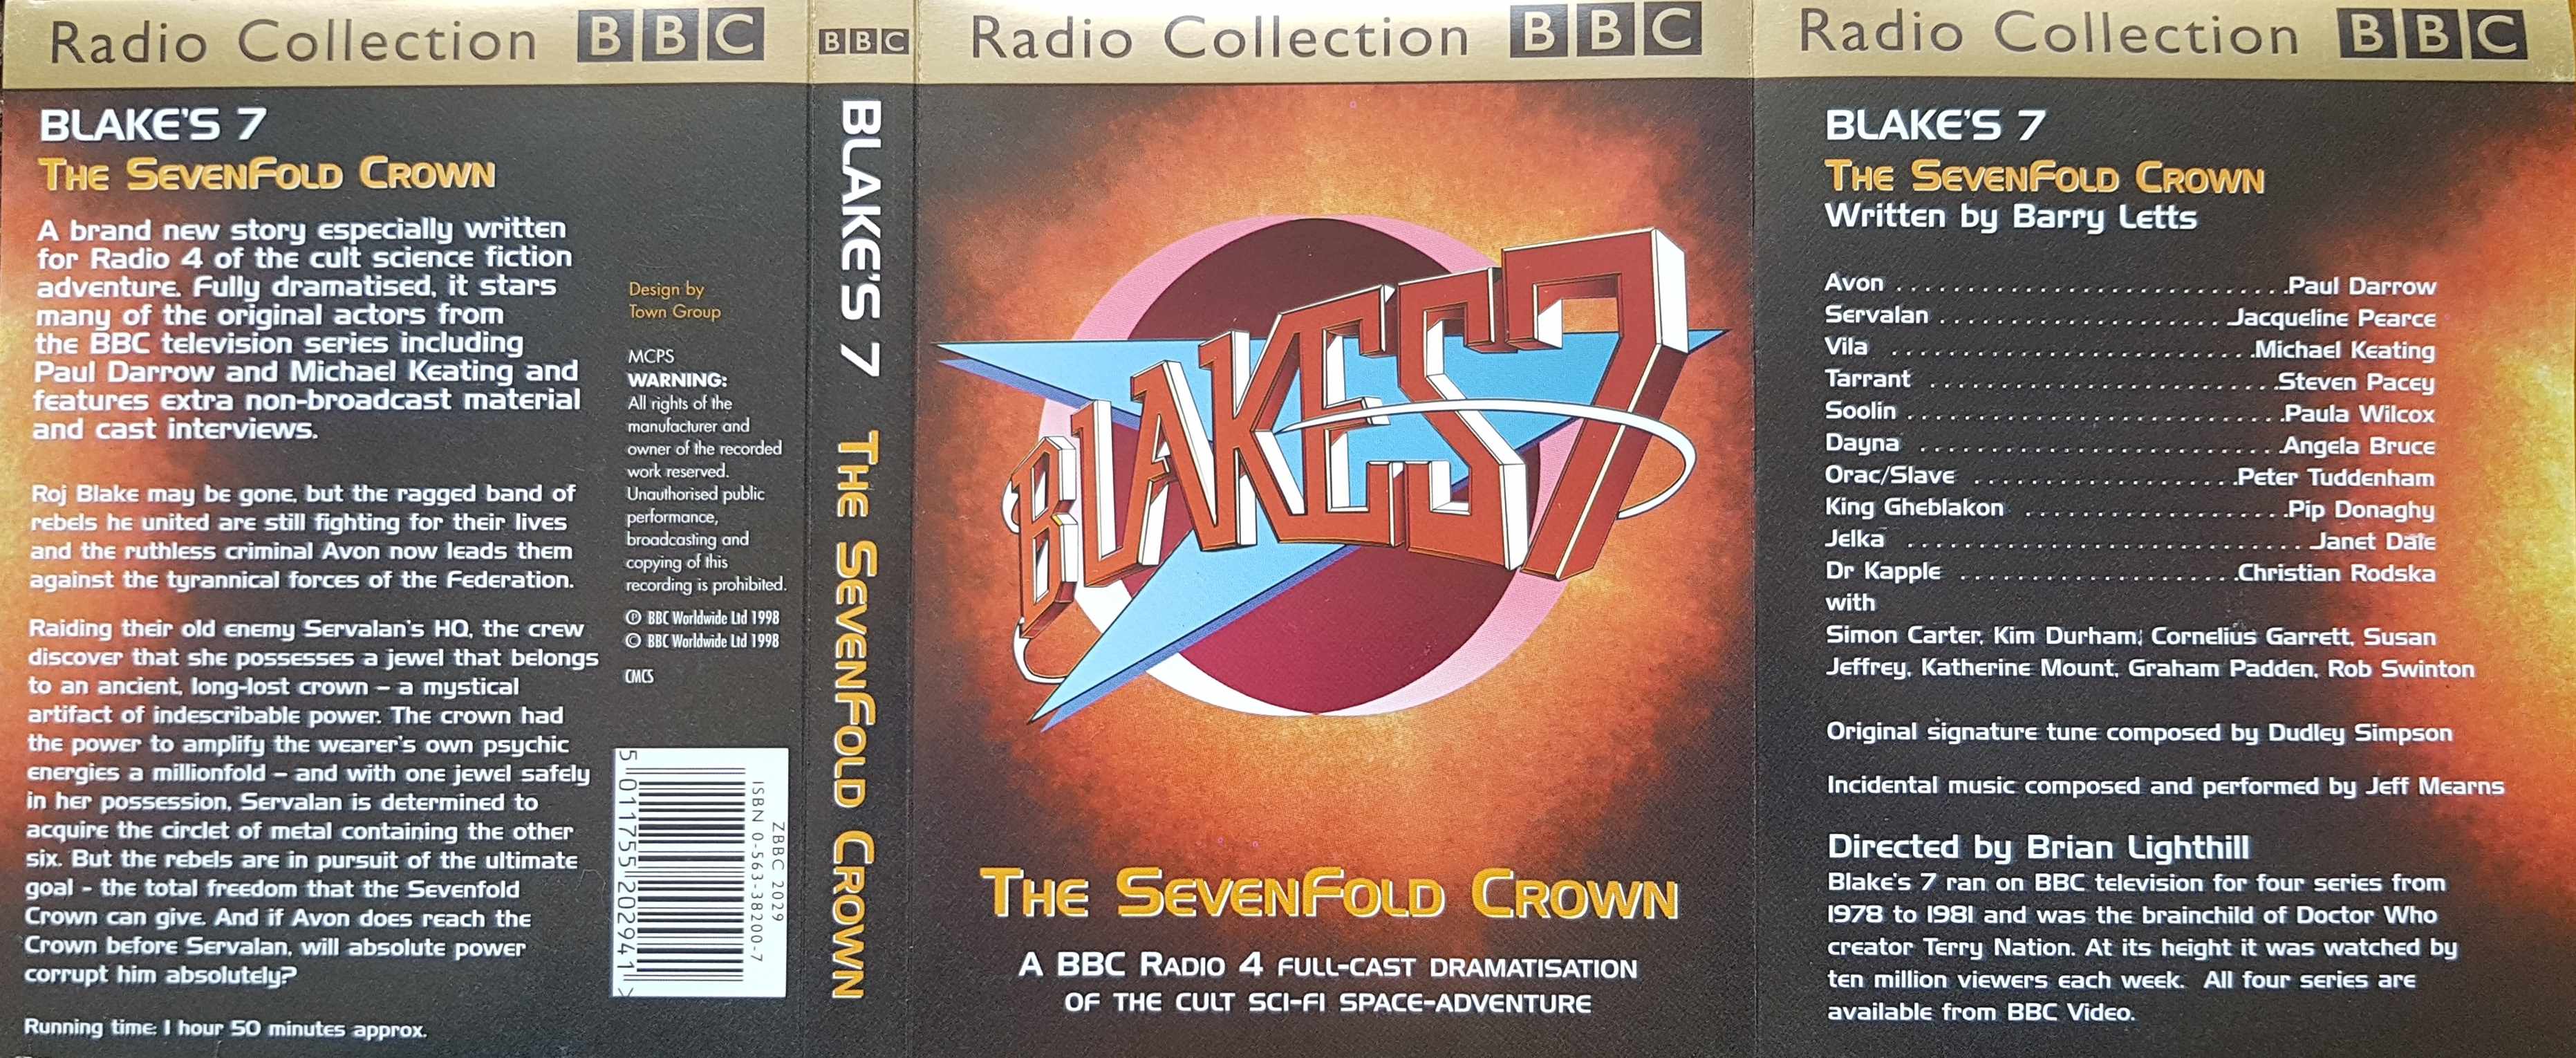 Picture of ZBBC 2029 Blake's 7 - The sevenfold crown by artist Unknown from the BBC records and Tapes library